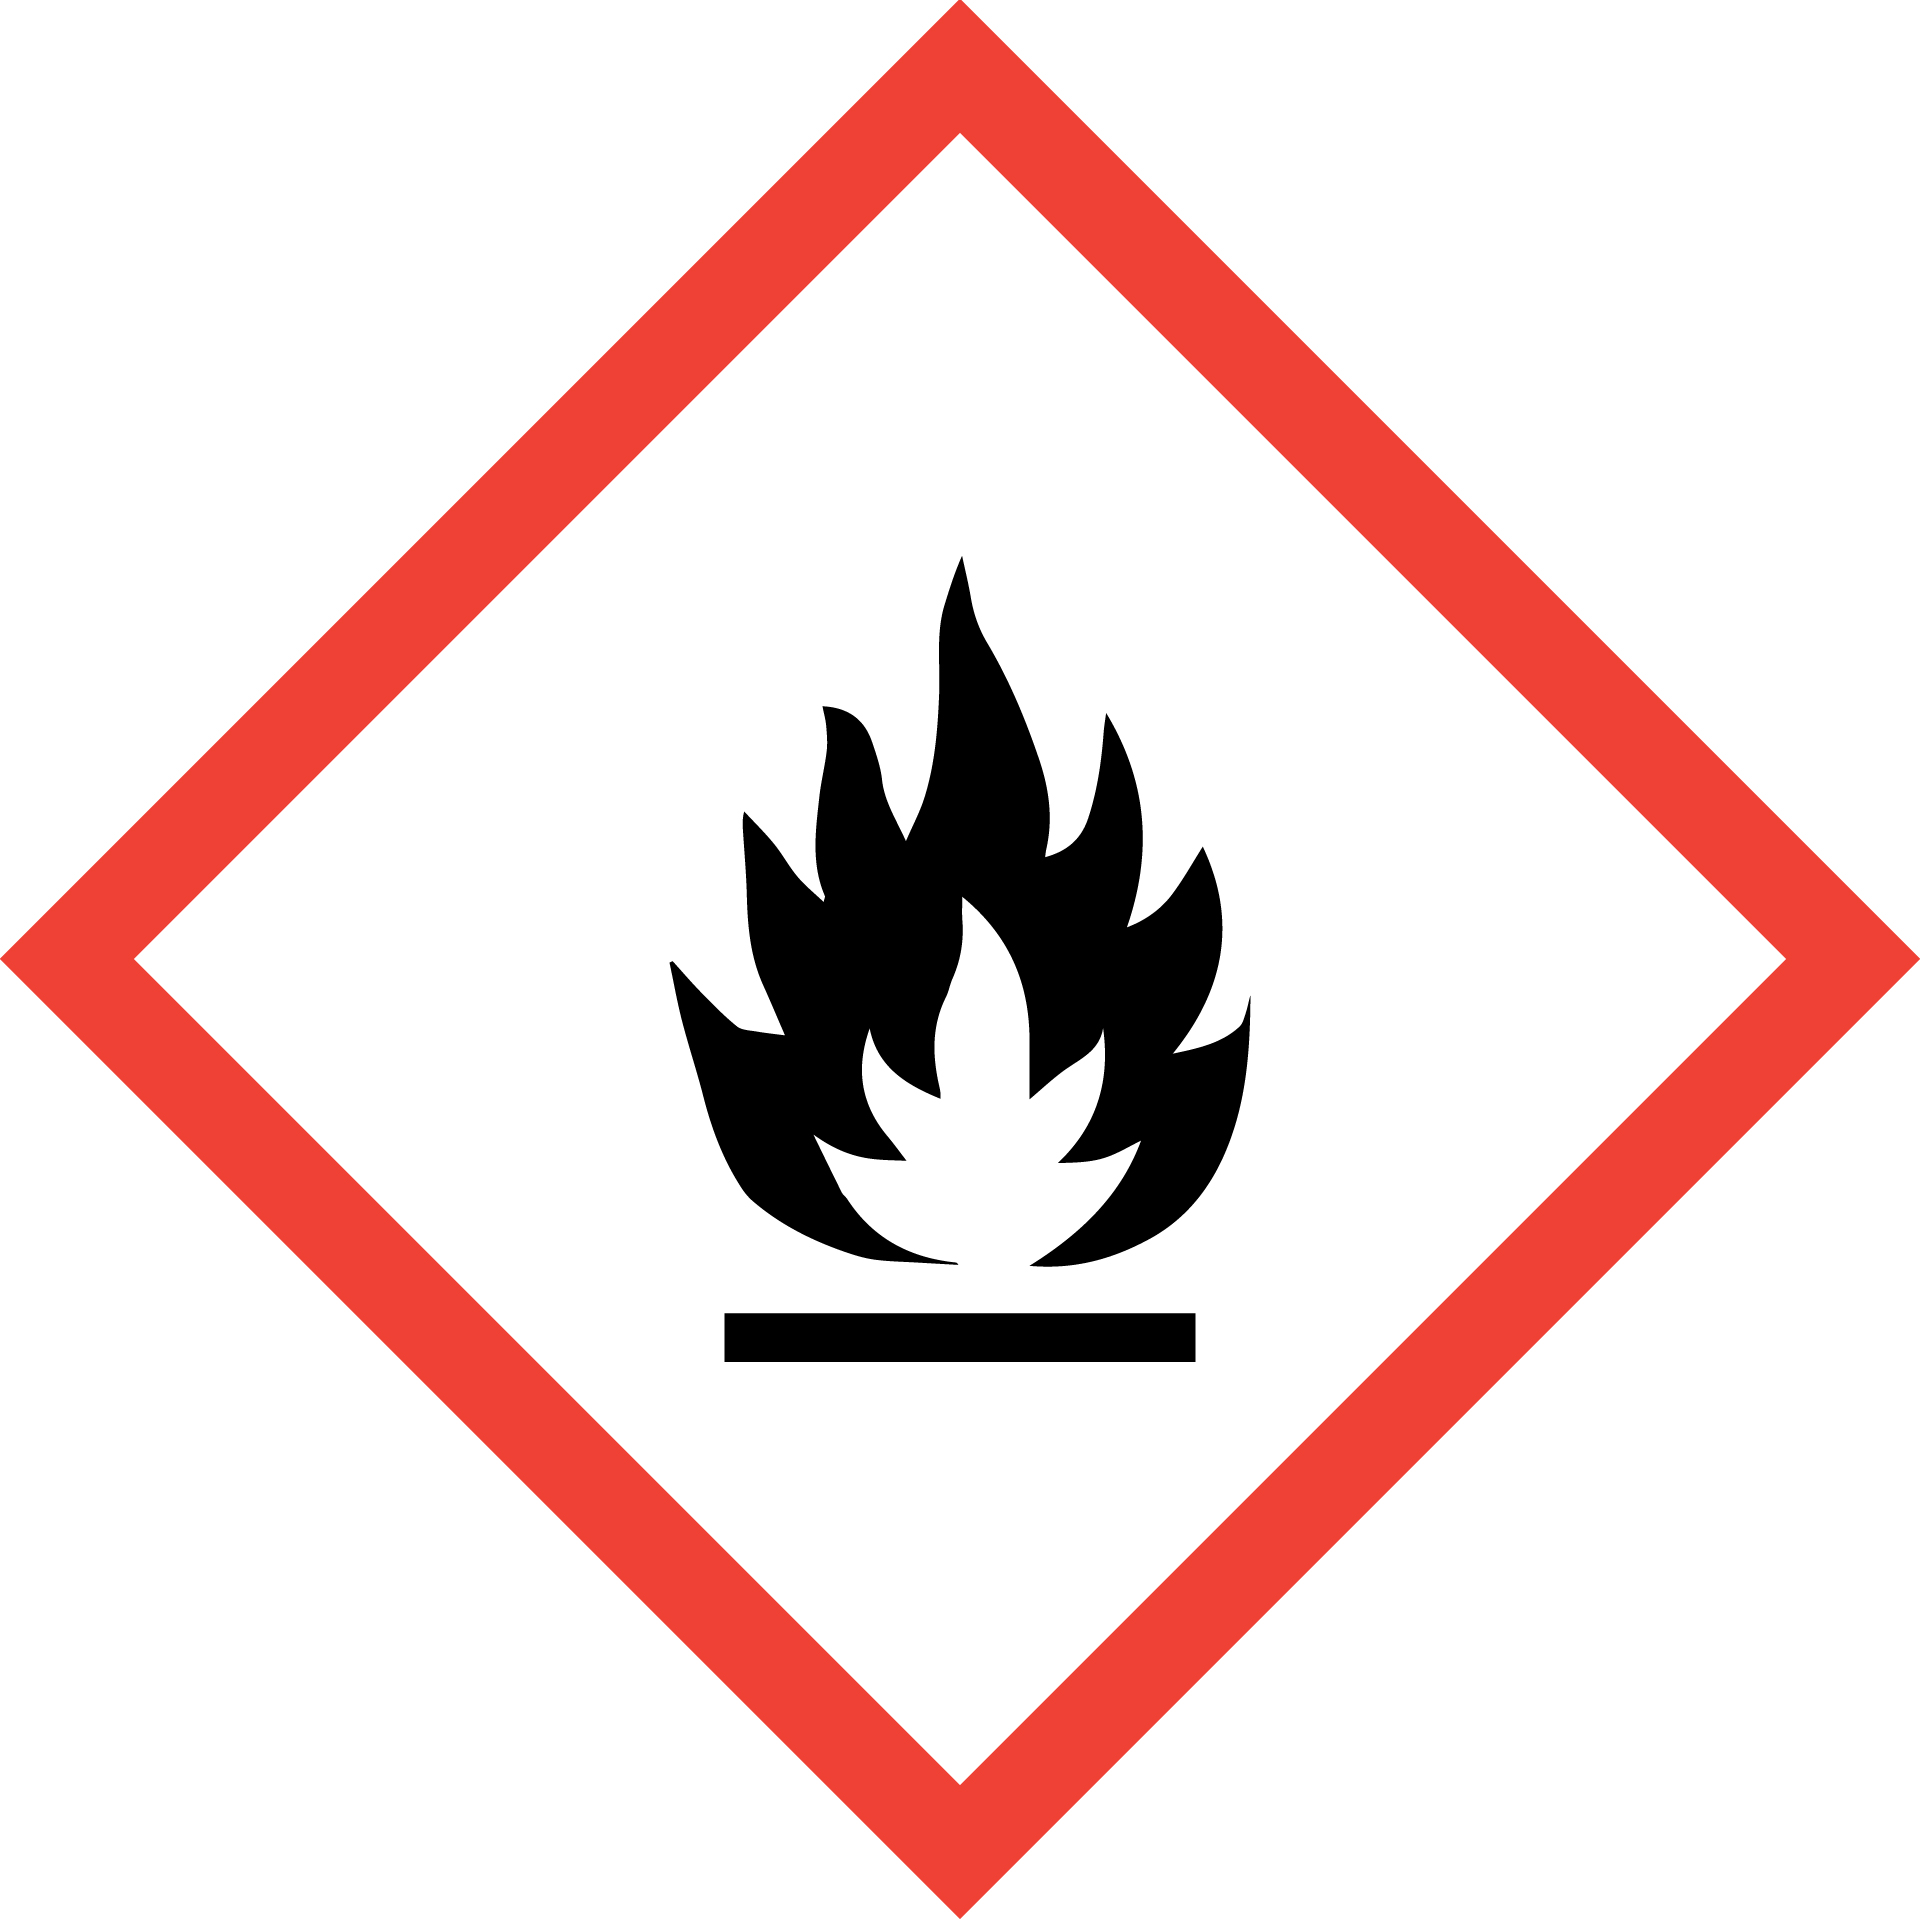 Chemical safety in the home | nidirect